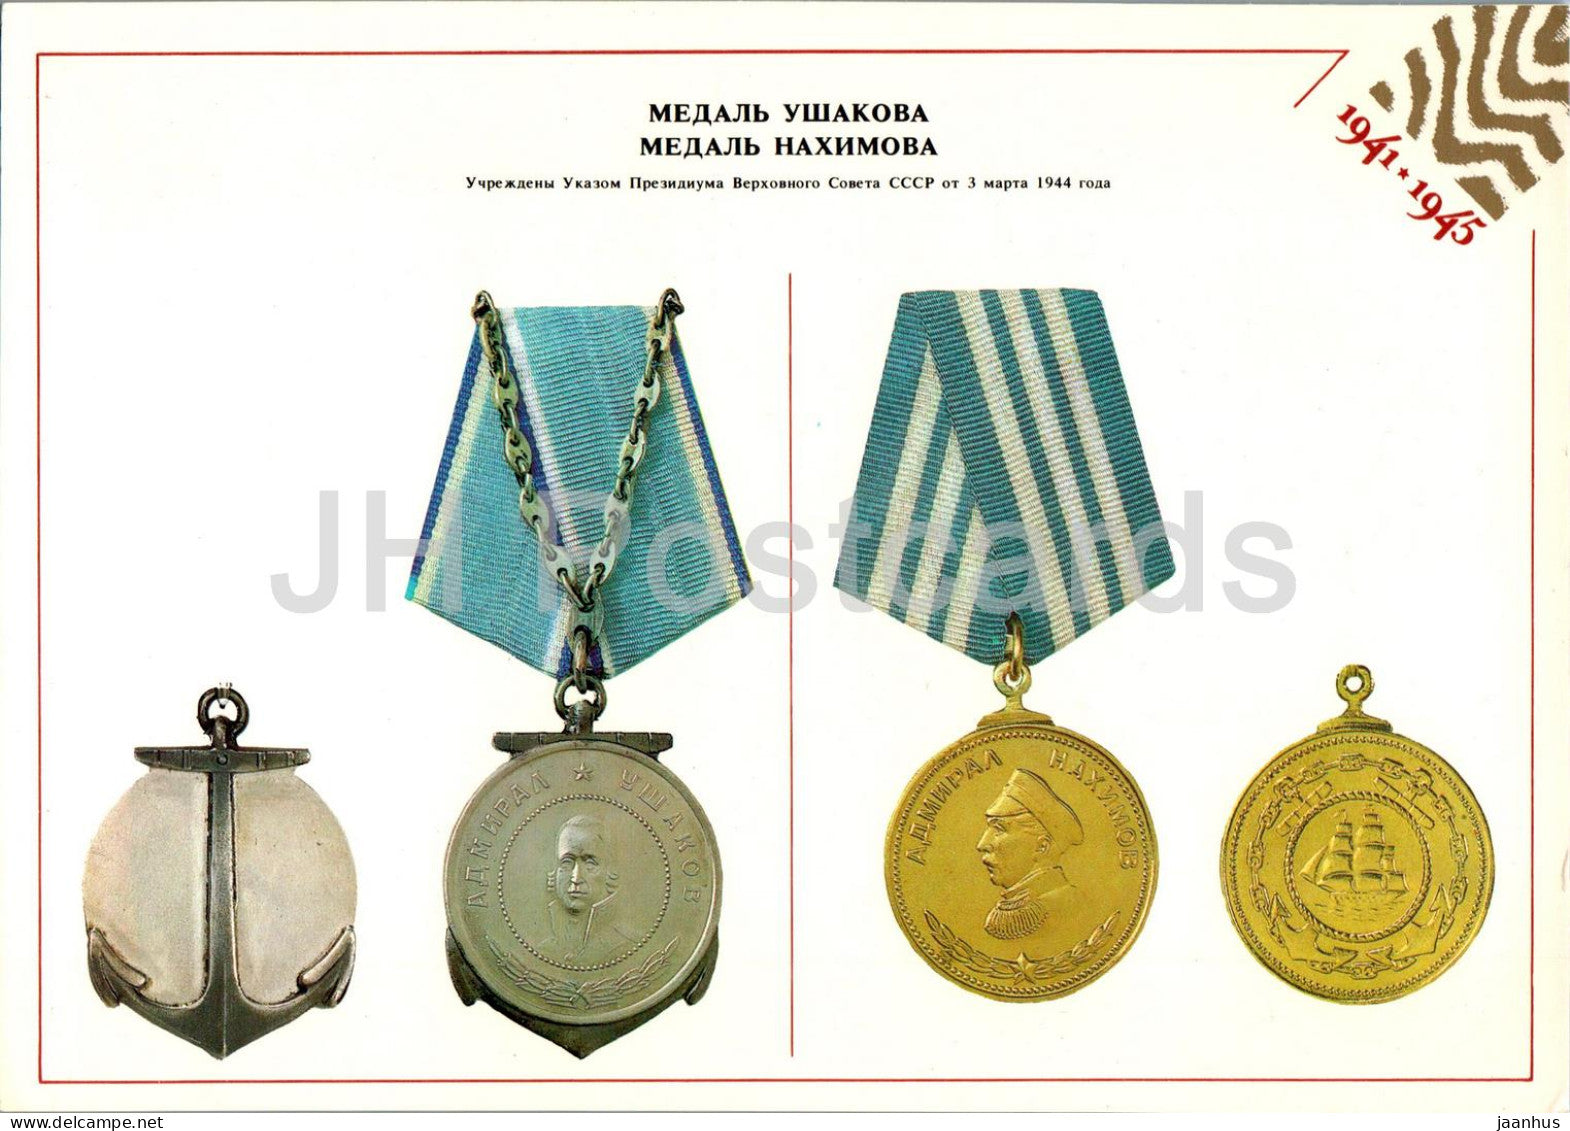 Medals of Ushakov and Nakhimov - Orders and Medals of the USSR - Large Format Card - 1985 - Russia USSR - unused - JH Postcards